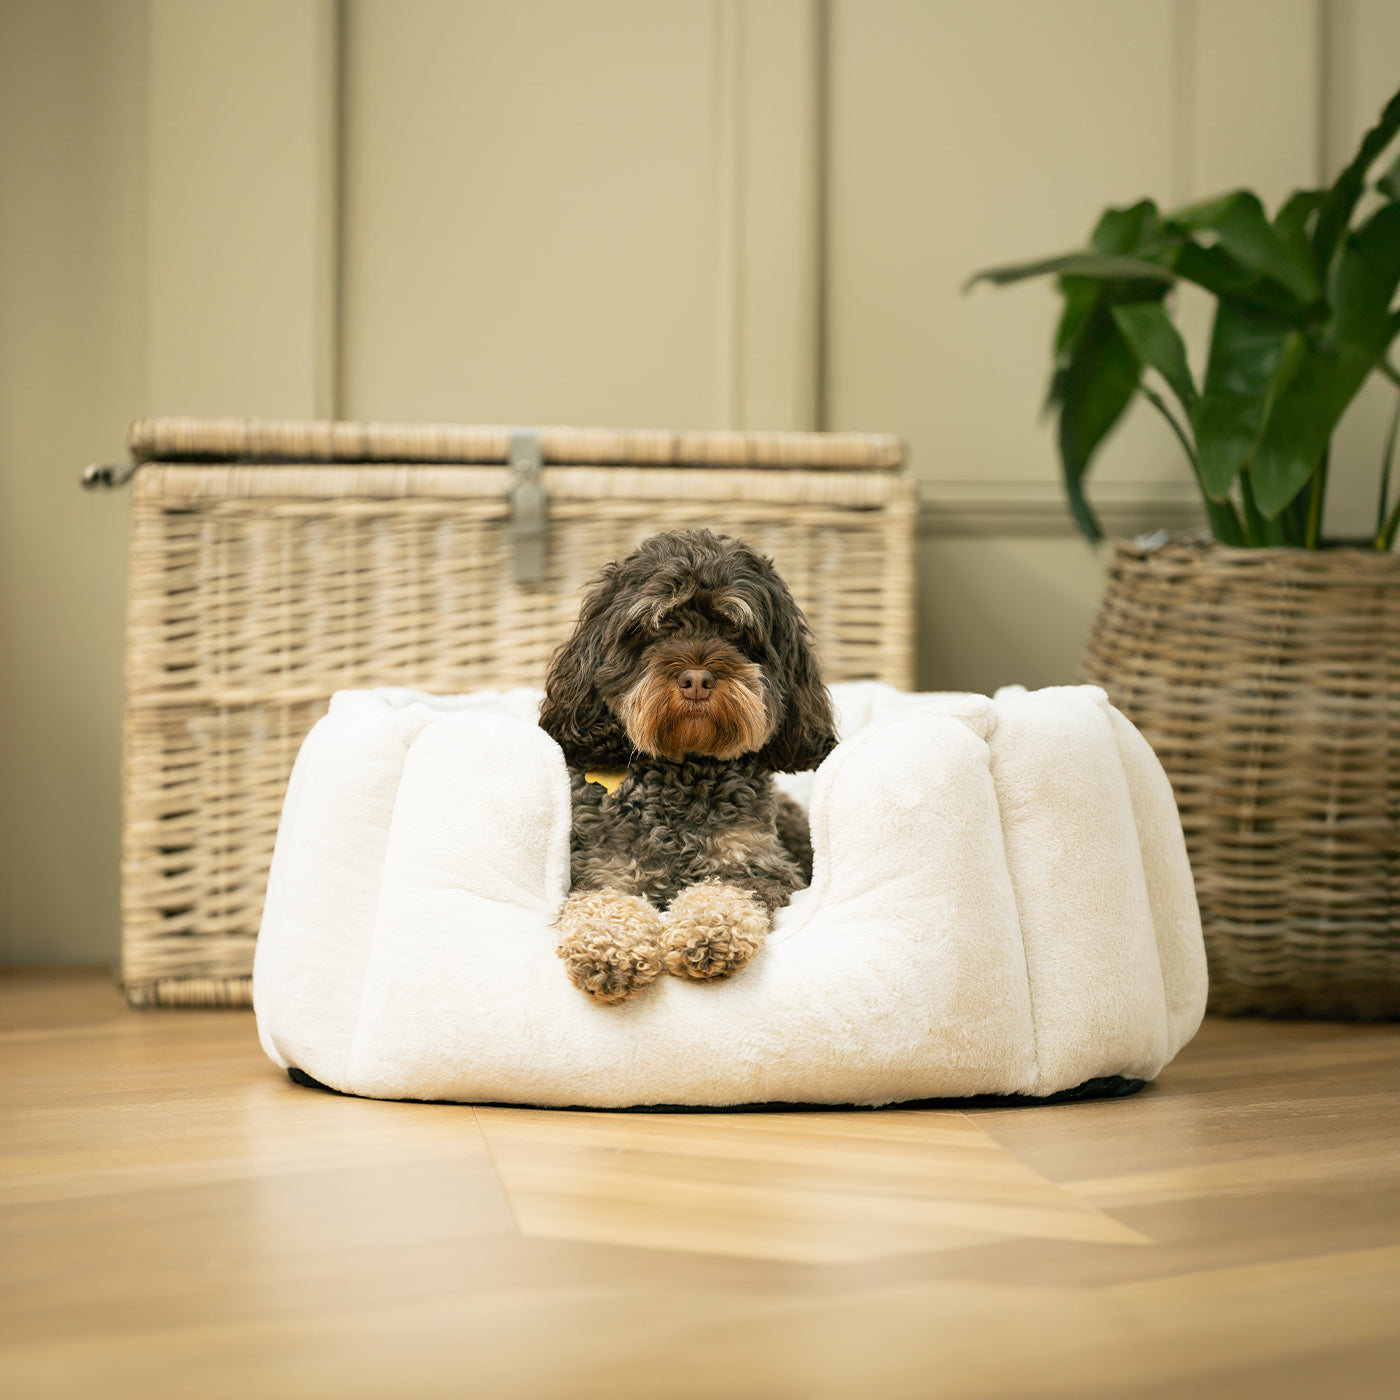 Discover Our Luxurious High Wall Bed For Dogs, Featuring inner pillow with plush teddy fleece on one side To Craft The Perfect Cat Bed In Stunning Anti-Anxiety Cream Faux Fur! Available To Personalise Now at Lords & Labradors    